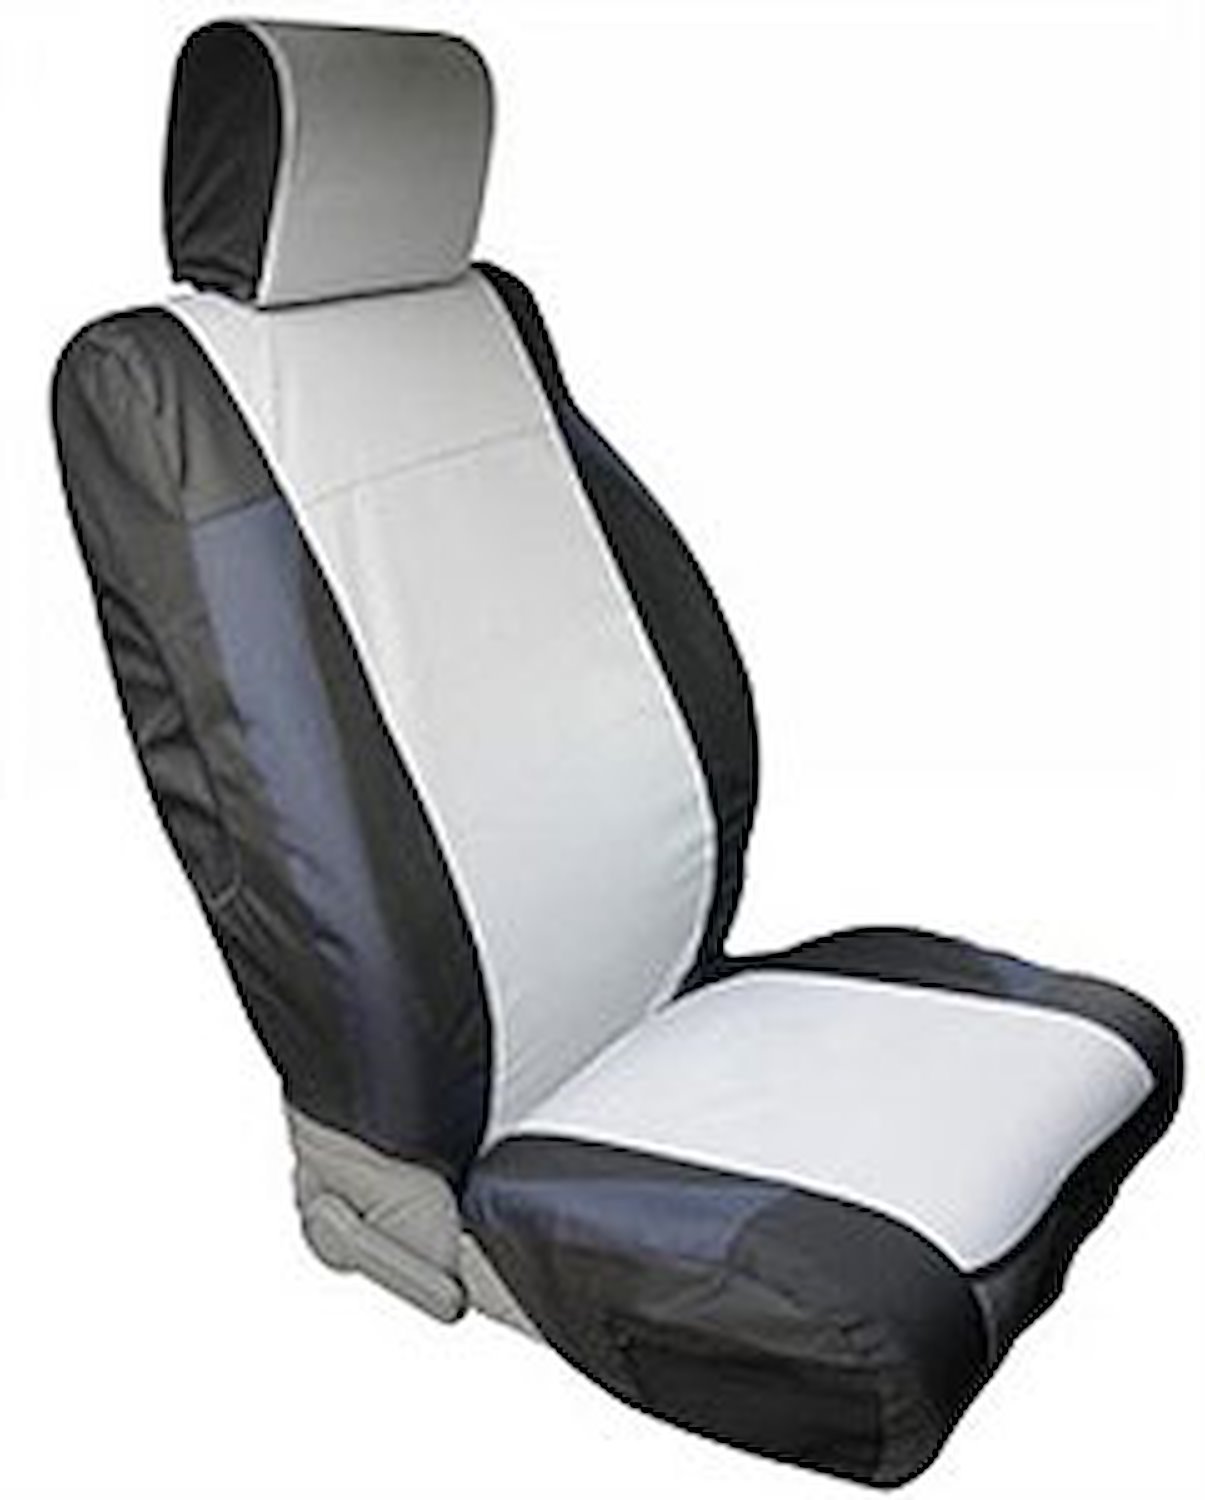 CUSTOM FIT POLYCANVAS SEAT COVER FRONT PAIR BLACK/GRAY